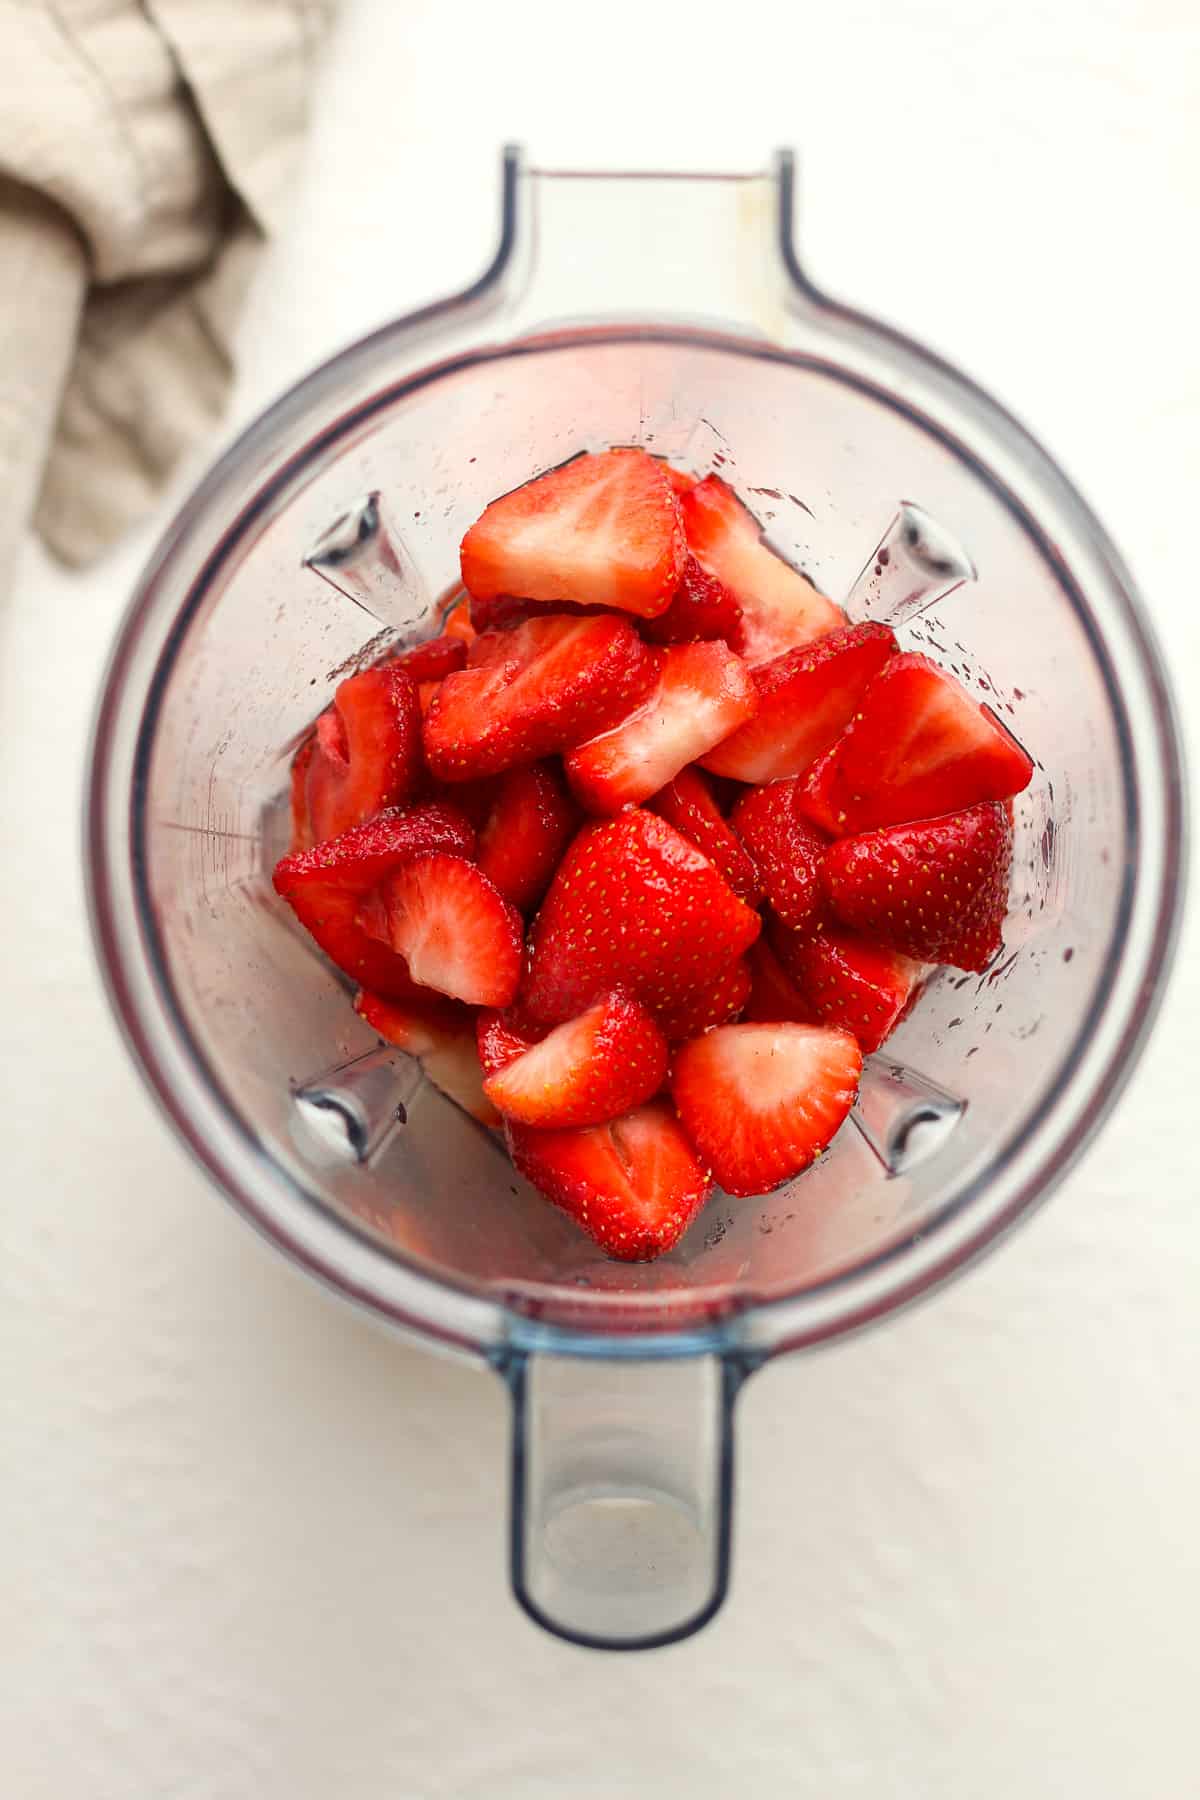 A blender of the sliced strawberries with sugar.